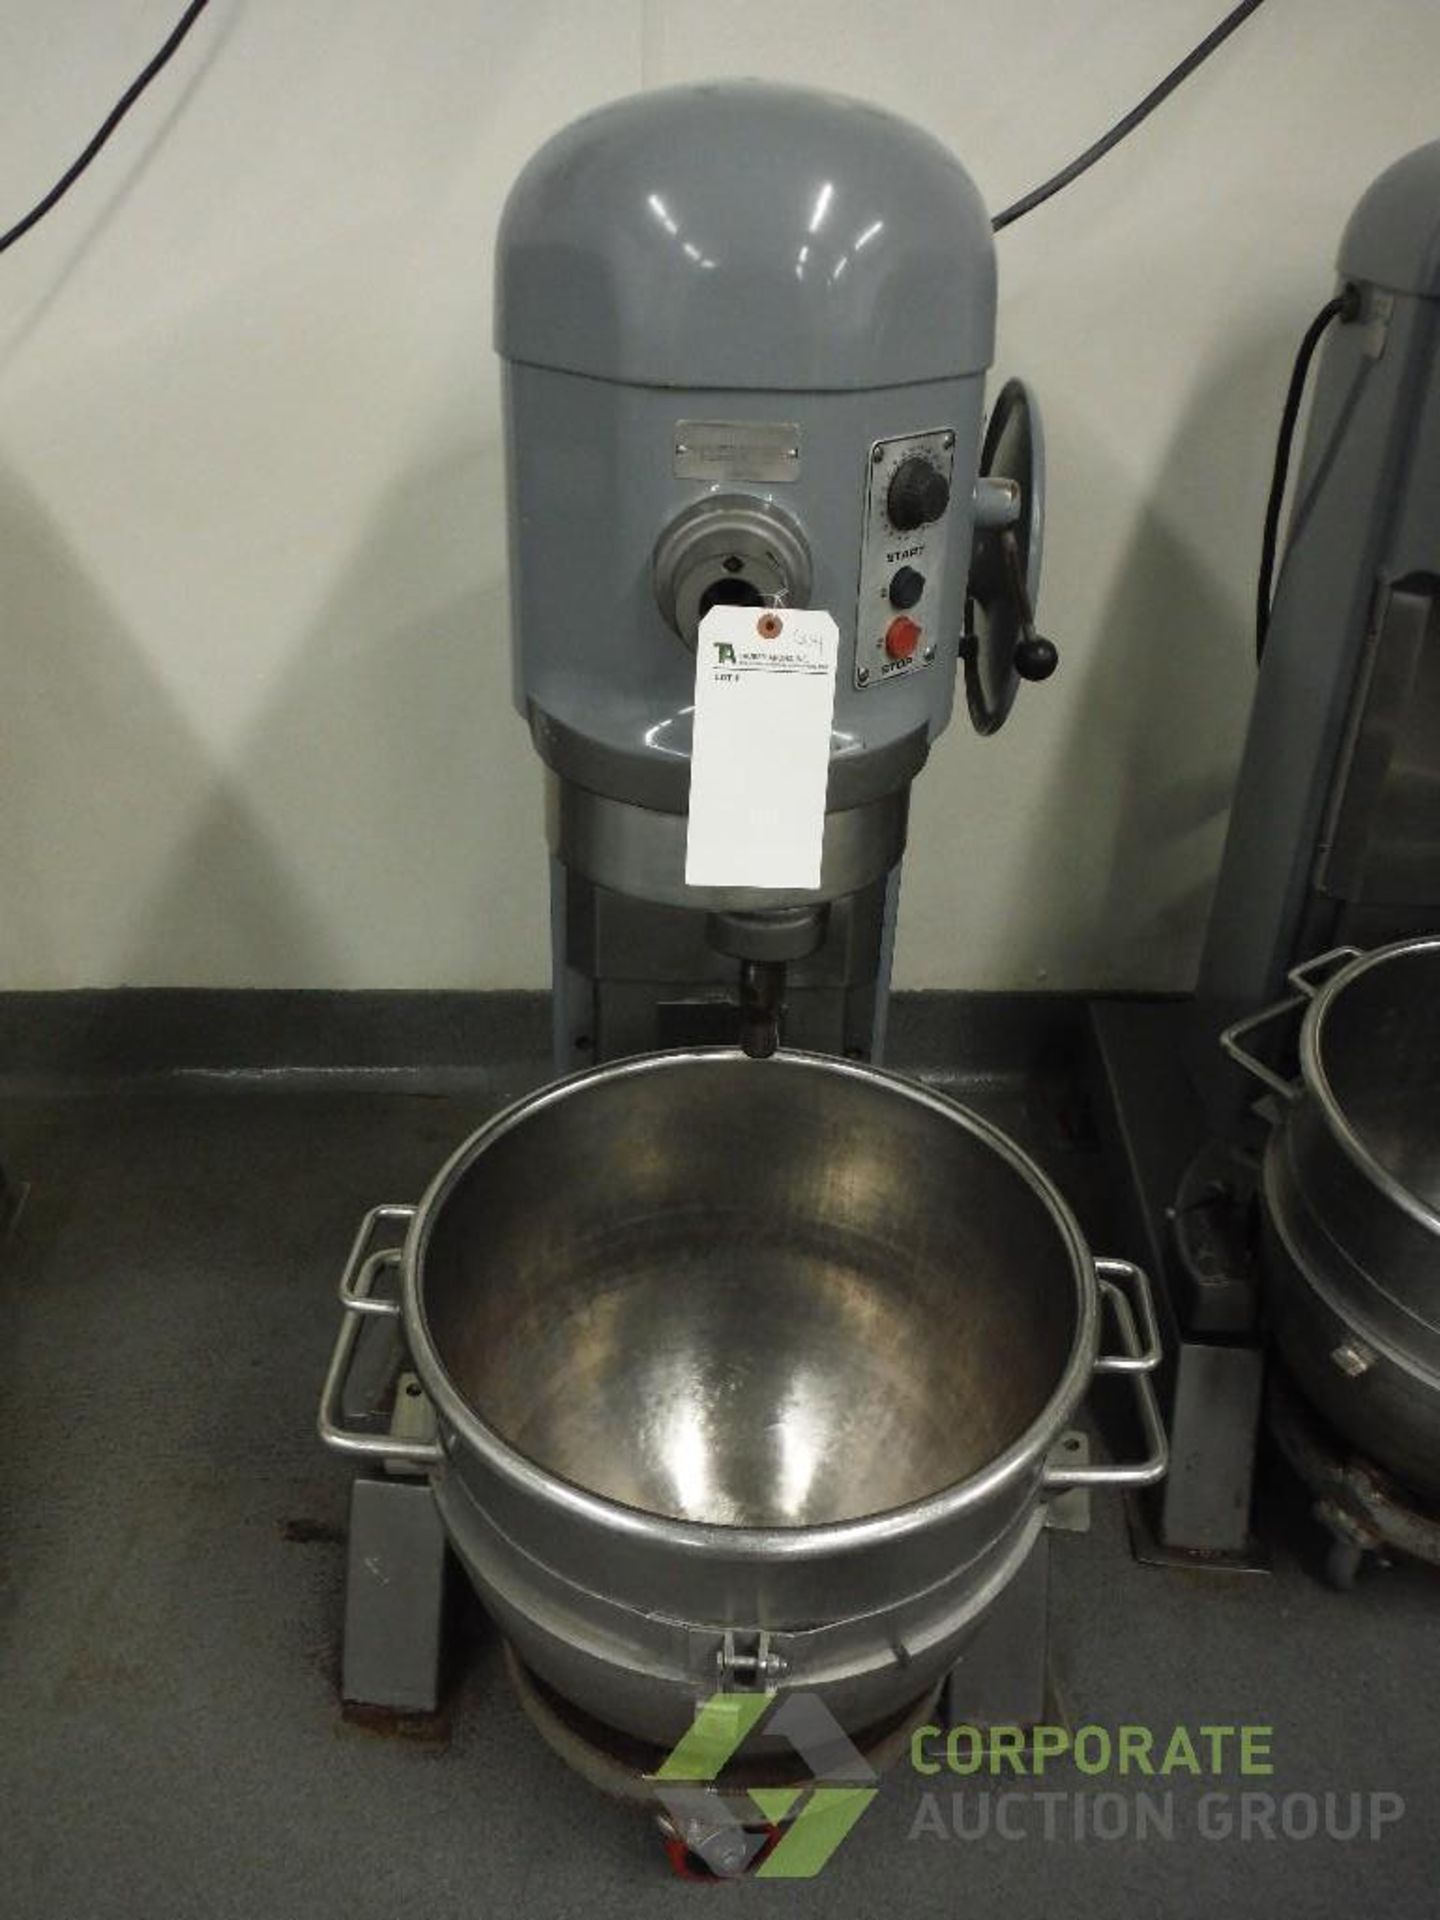 Hobart 80 qt. mixer, Model L 800, SN 11-351-008, with SS bowl, dolly